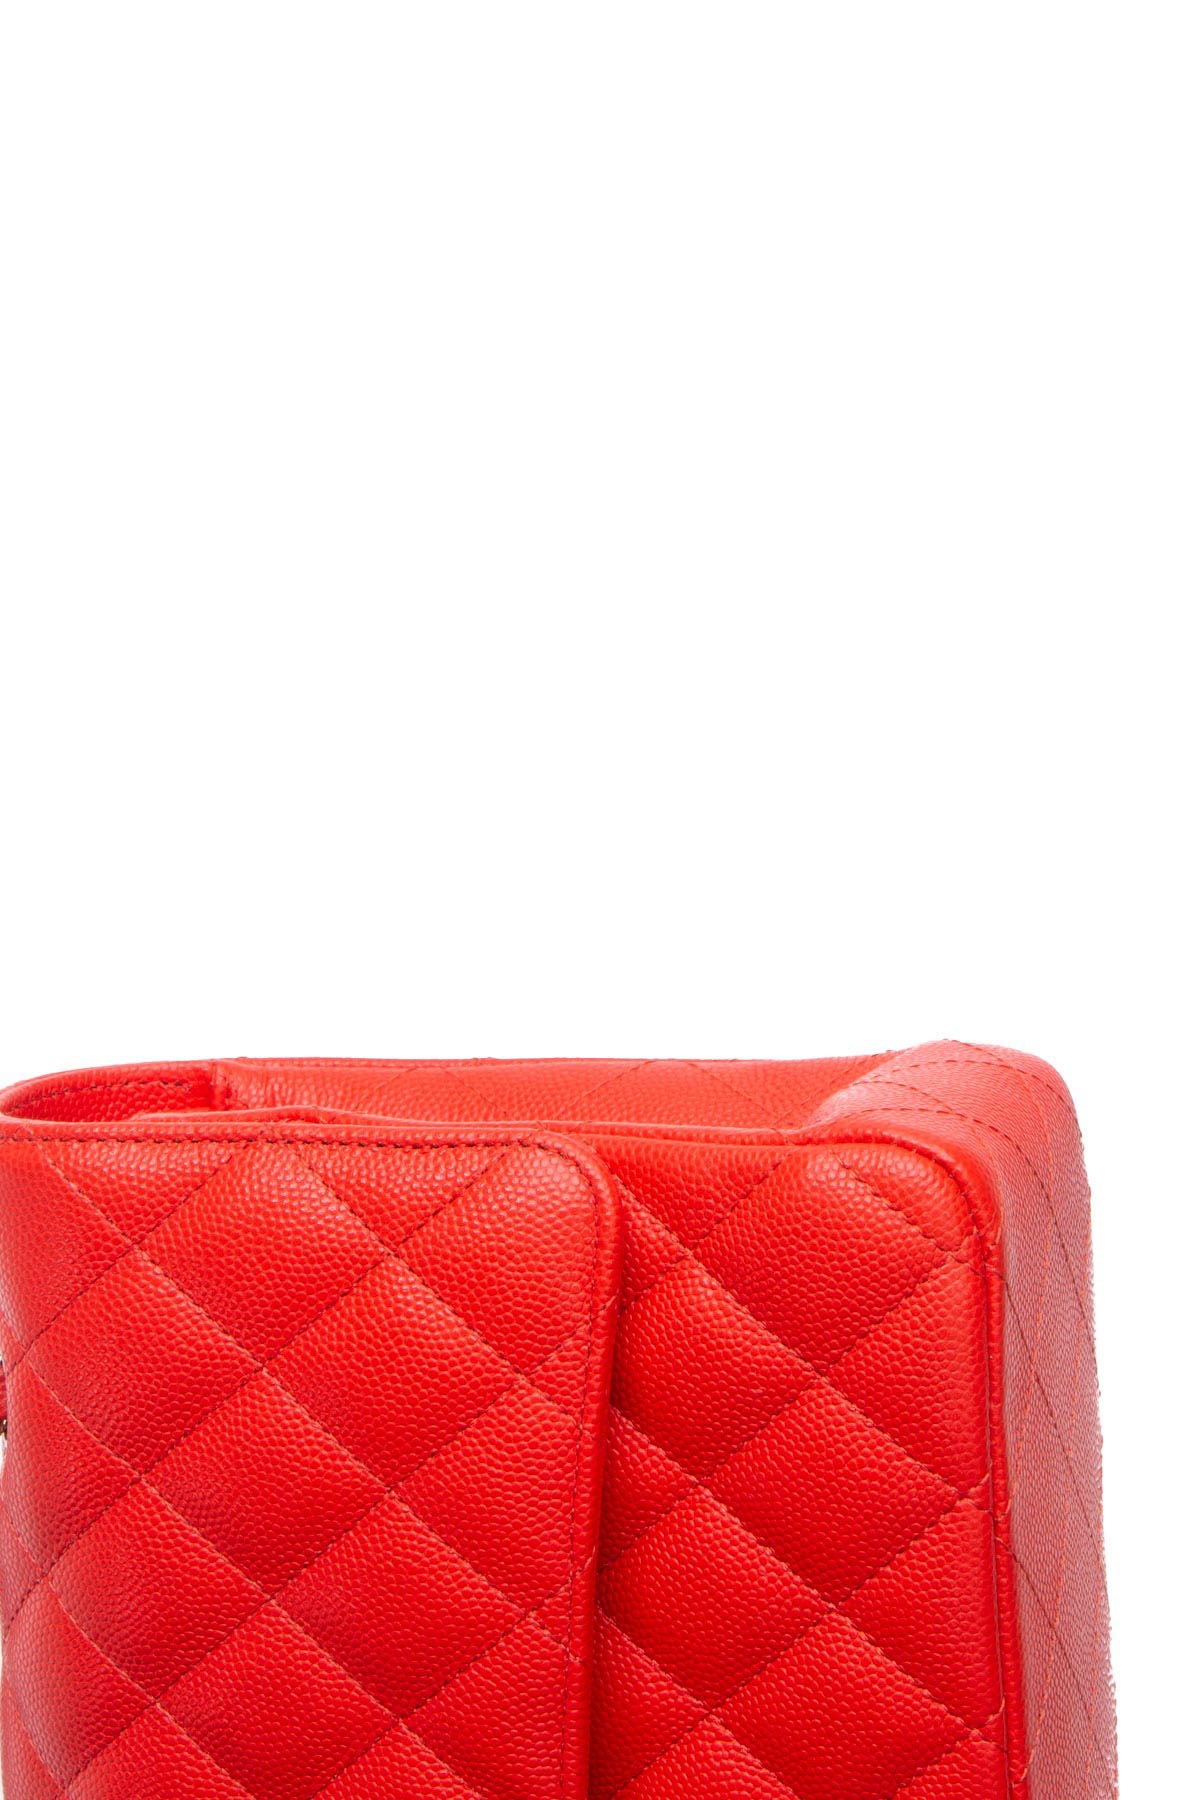 Chanel Classic Caviar Quilted Leather Flat Wallet Pouch Red